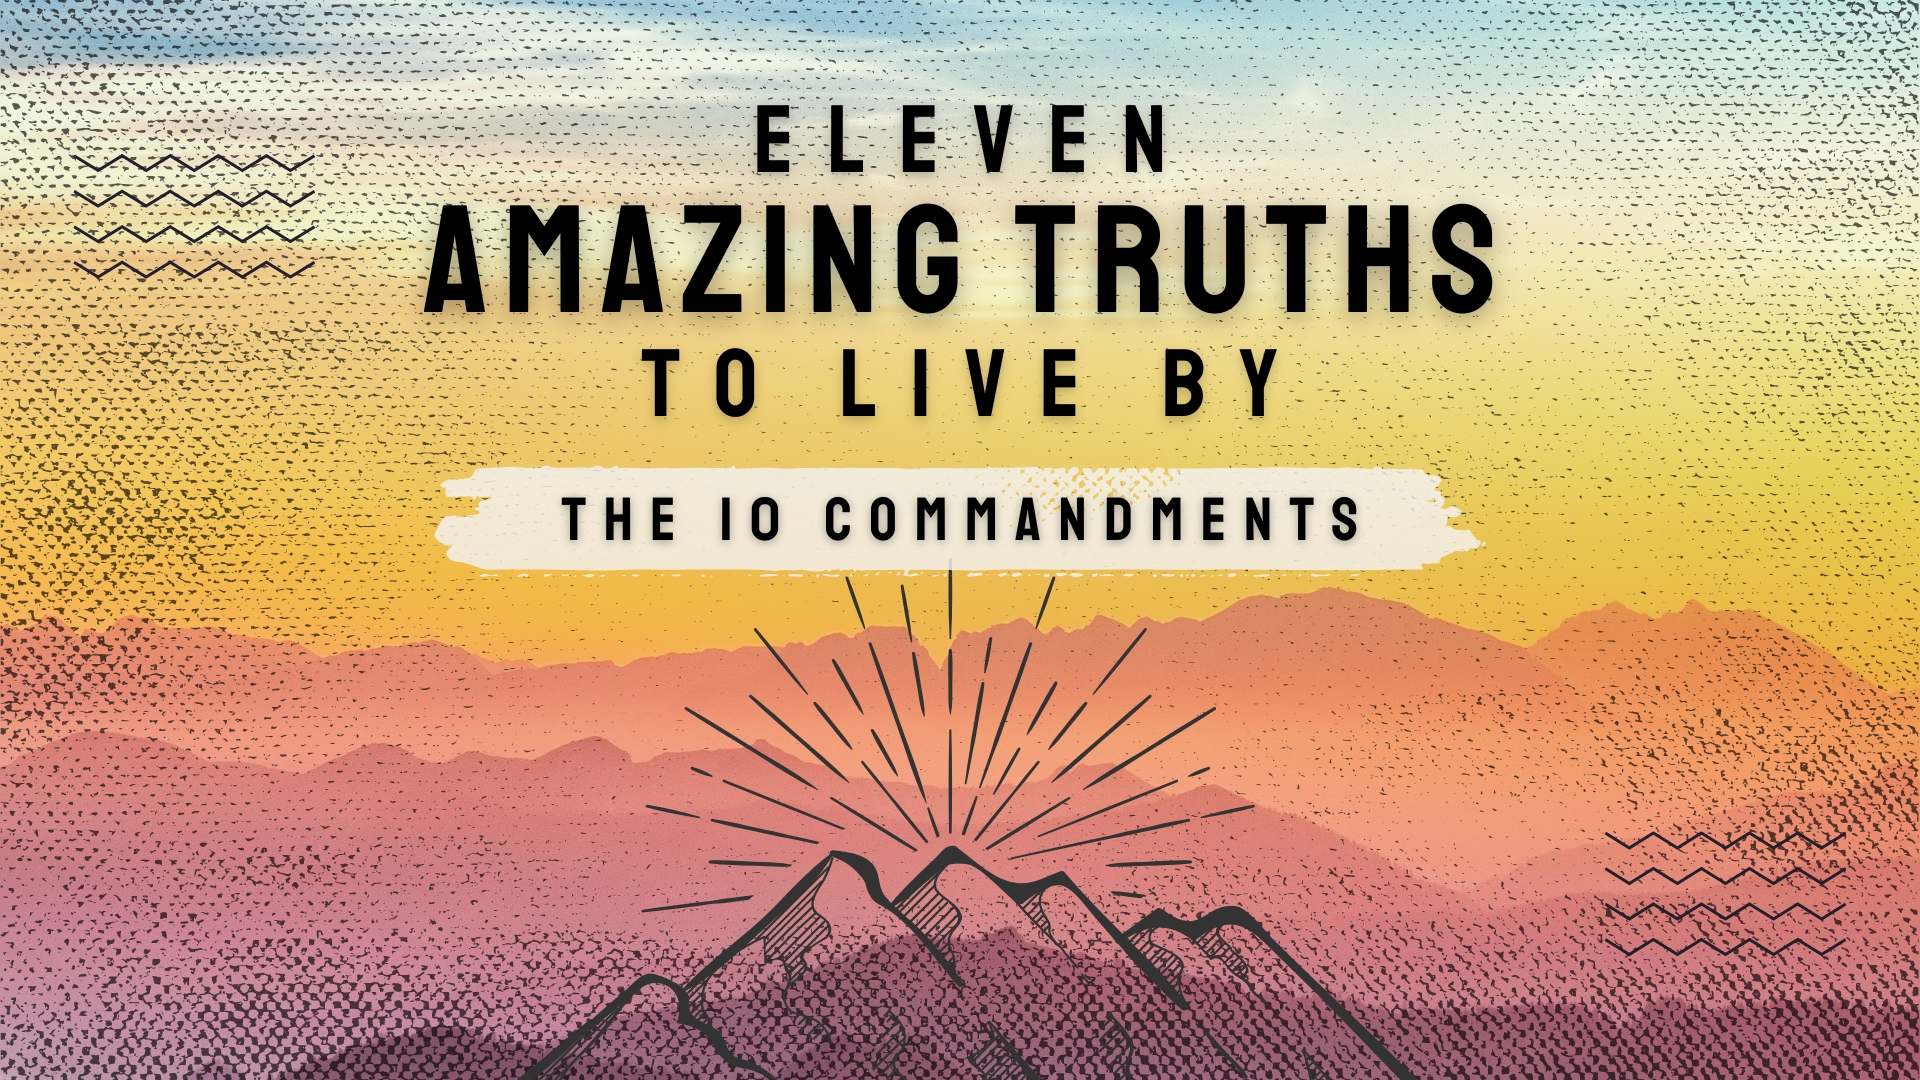 Eleven Amazing Truths to live by